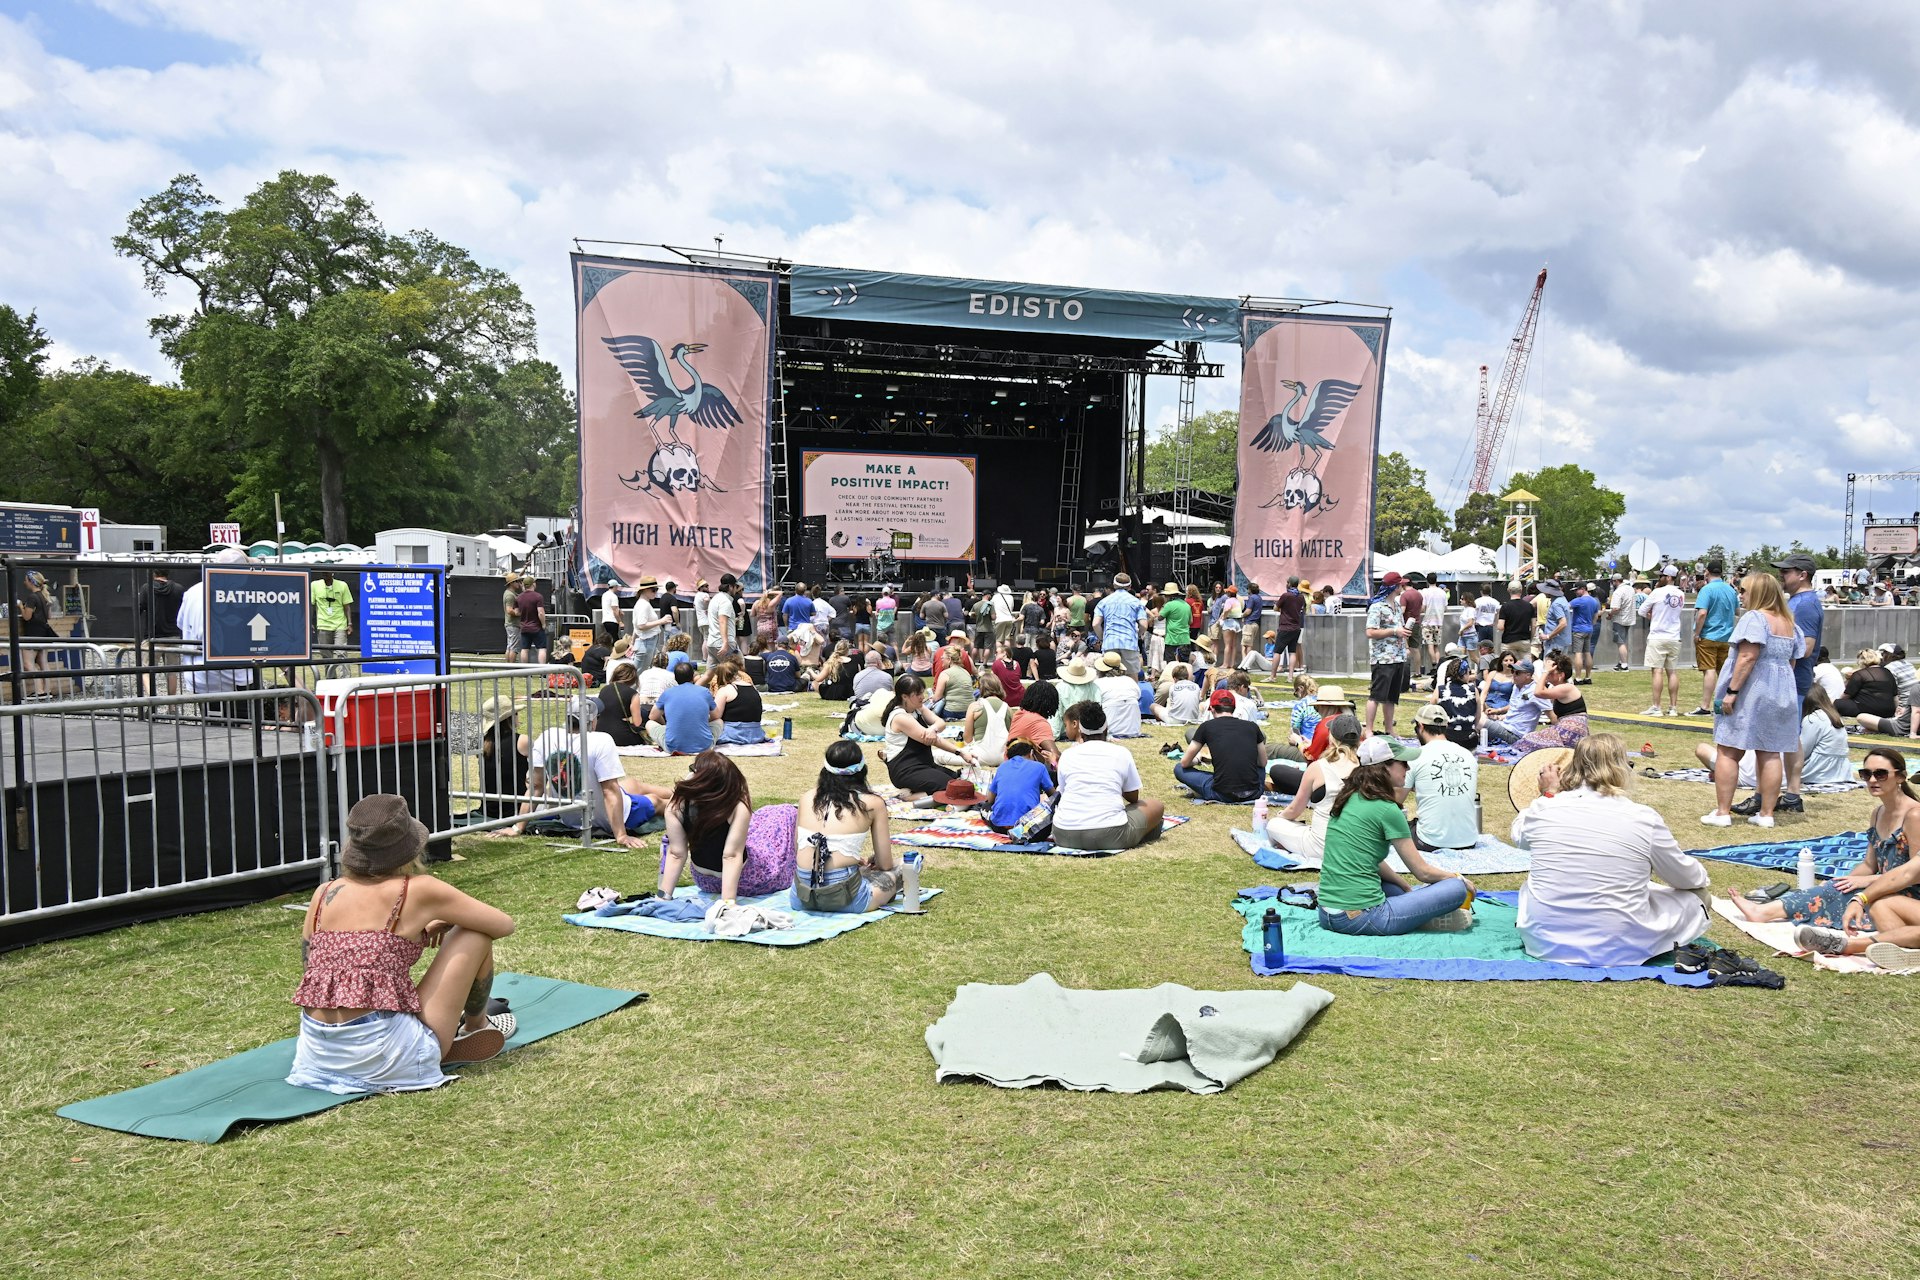 An outdoor stage at the High Water Festival in South Carolina